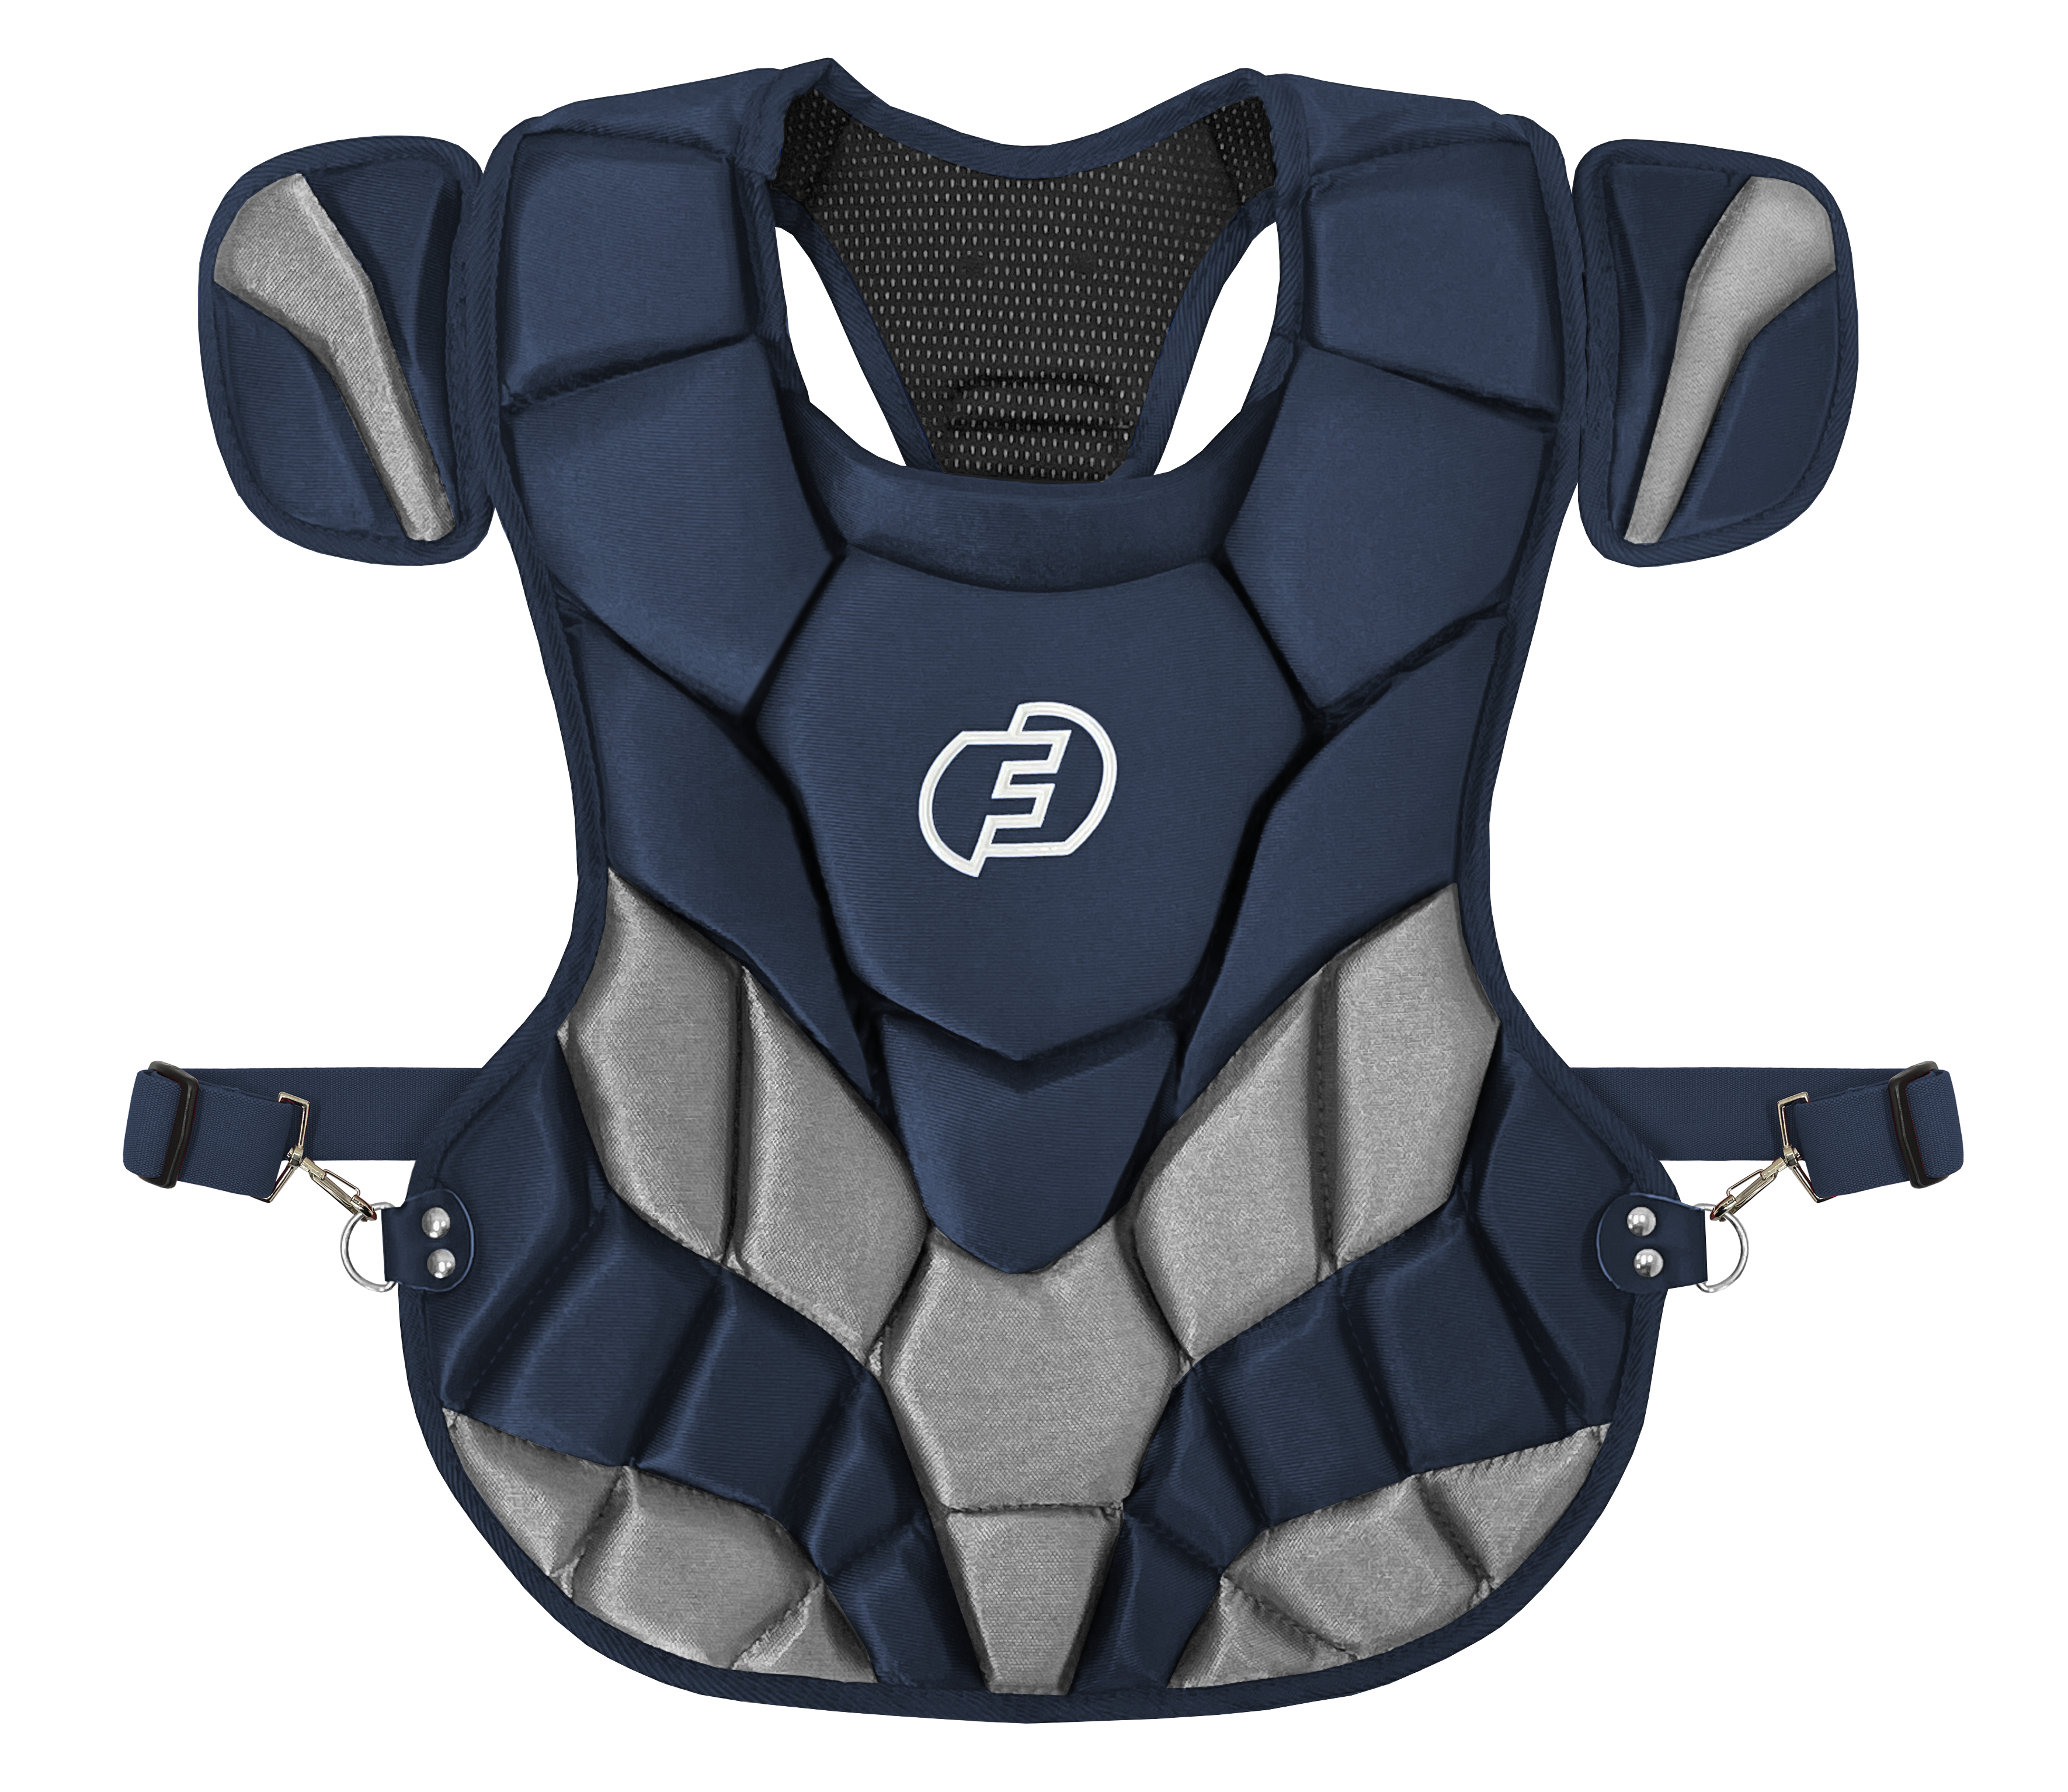 Force3 YOUTH |CHEST PROTECTOR WITH DUPONT™ KEVLAR® | SEI CERTIFIED TO MEET NOCSAE STANDARD